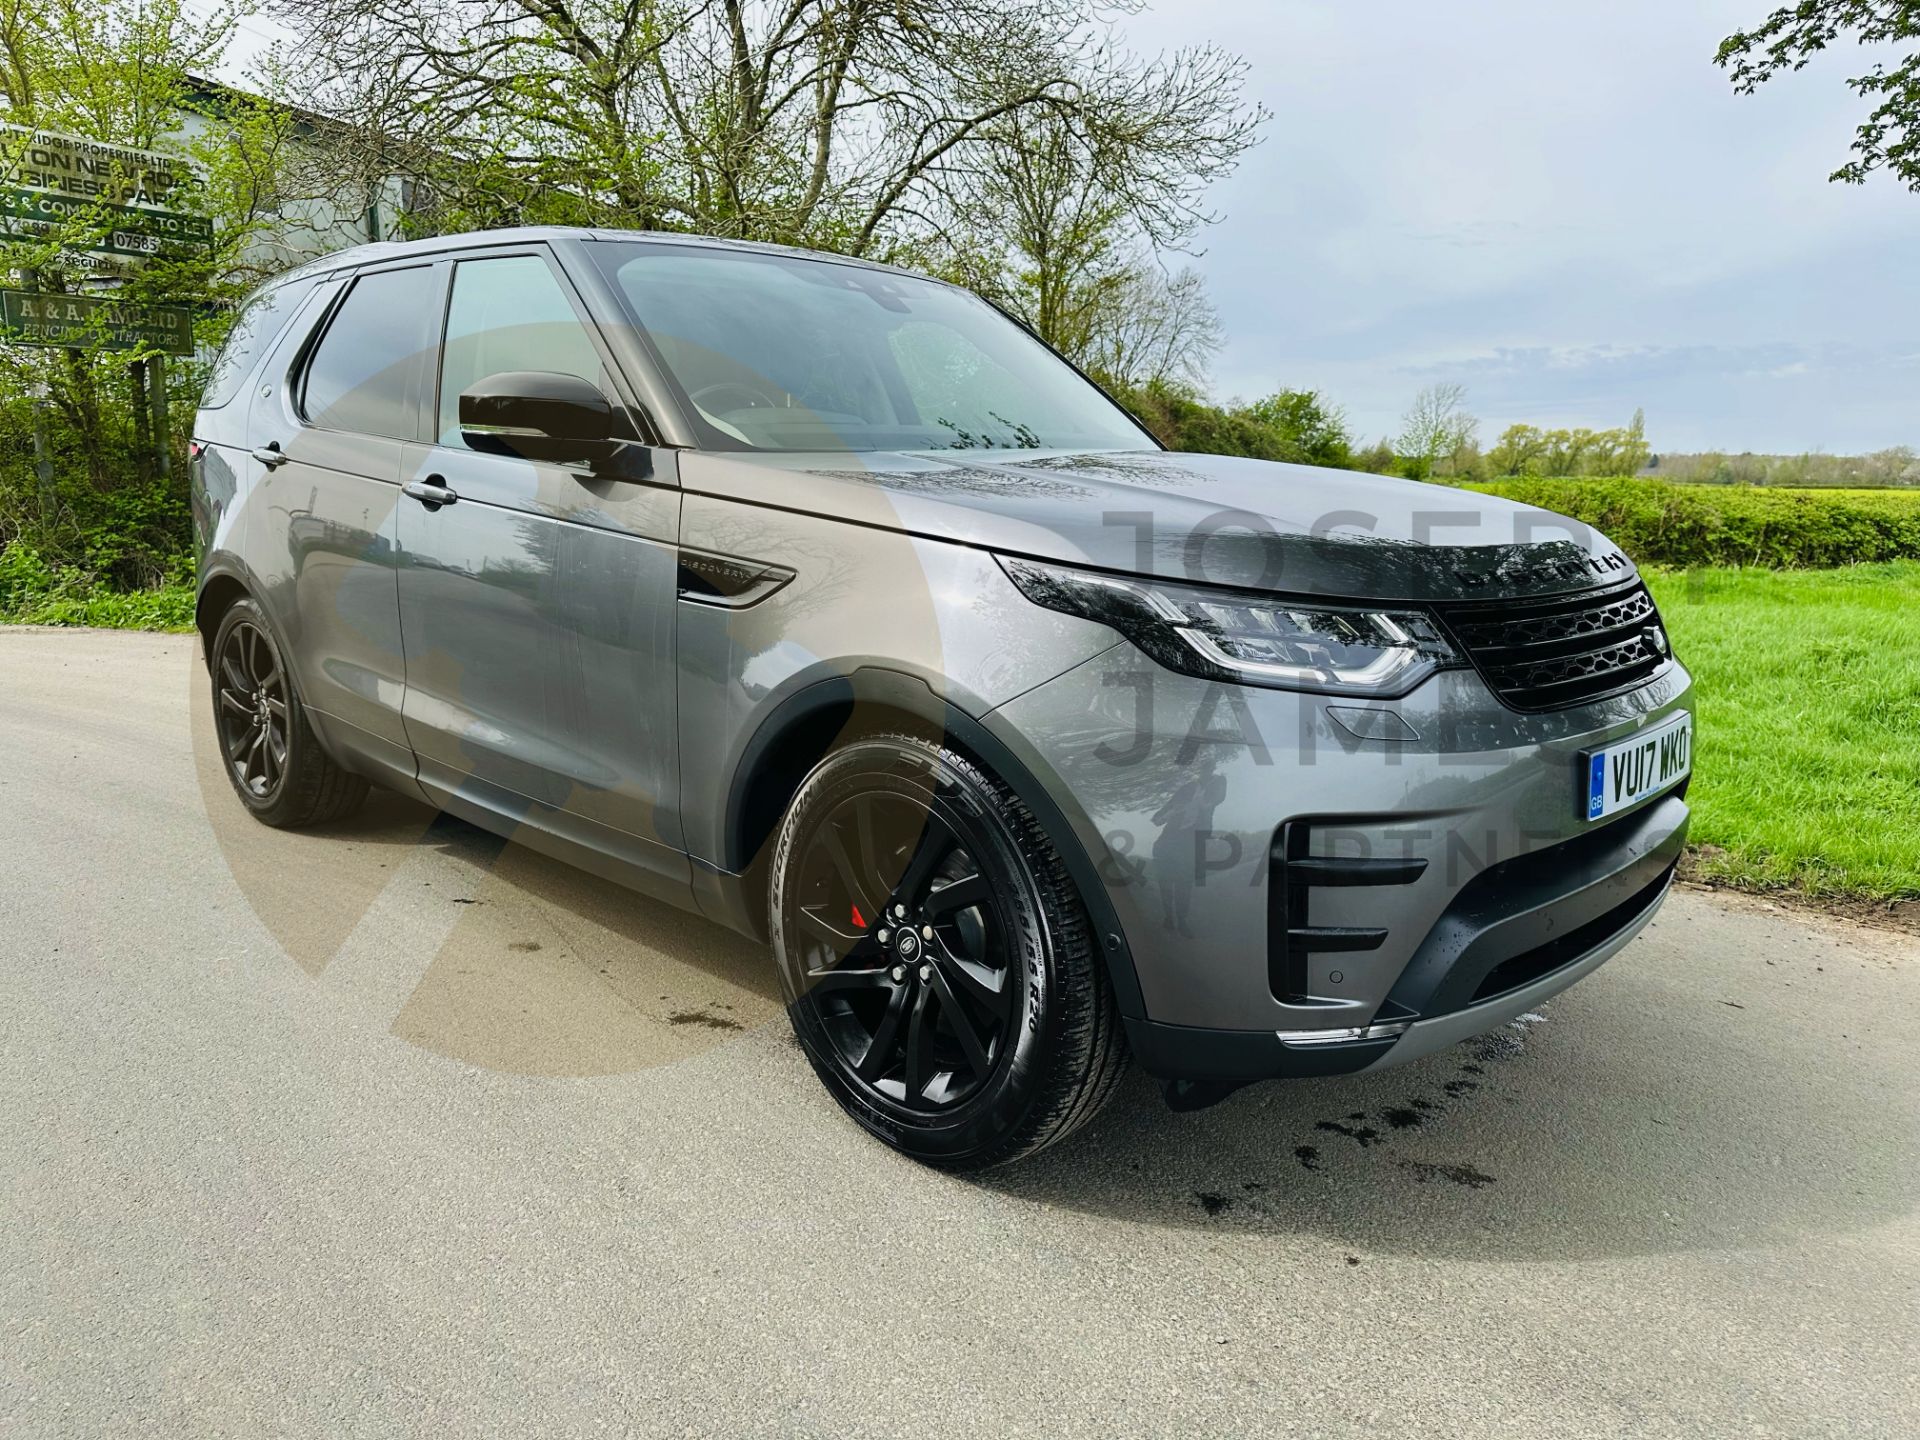 (On Sale) LAND ROVER DISCOVERY *HSE EDITION* AUTOMATIC (2017) 7 SEATER-ONLY 89K MILES - FULLY LOADED - Image 2 of 48